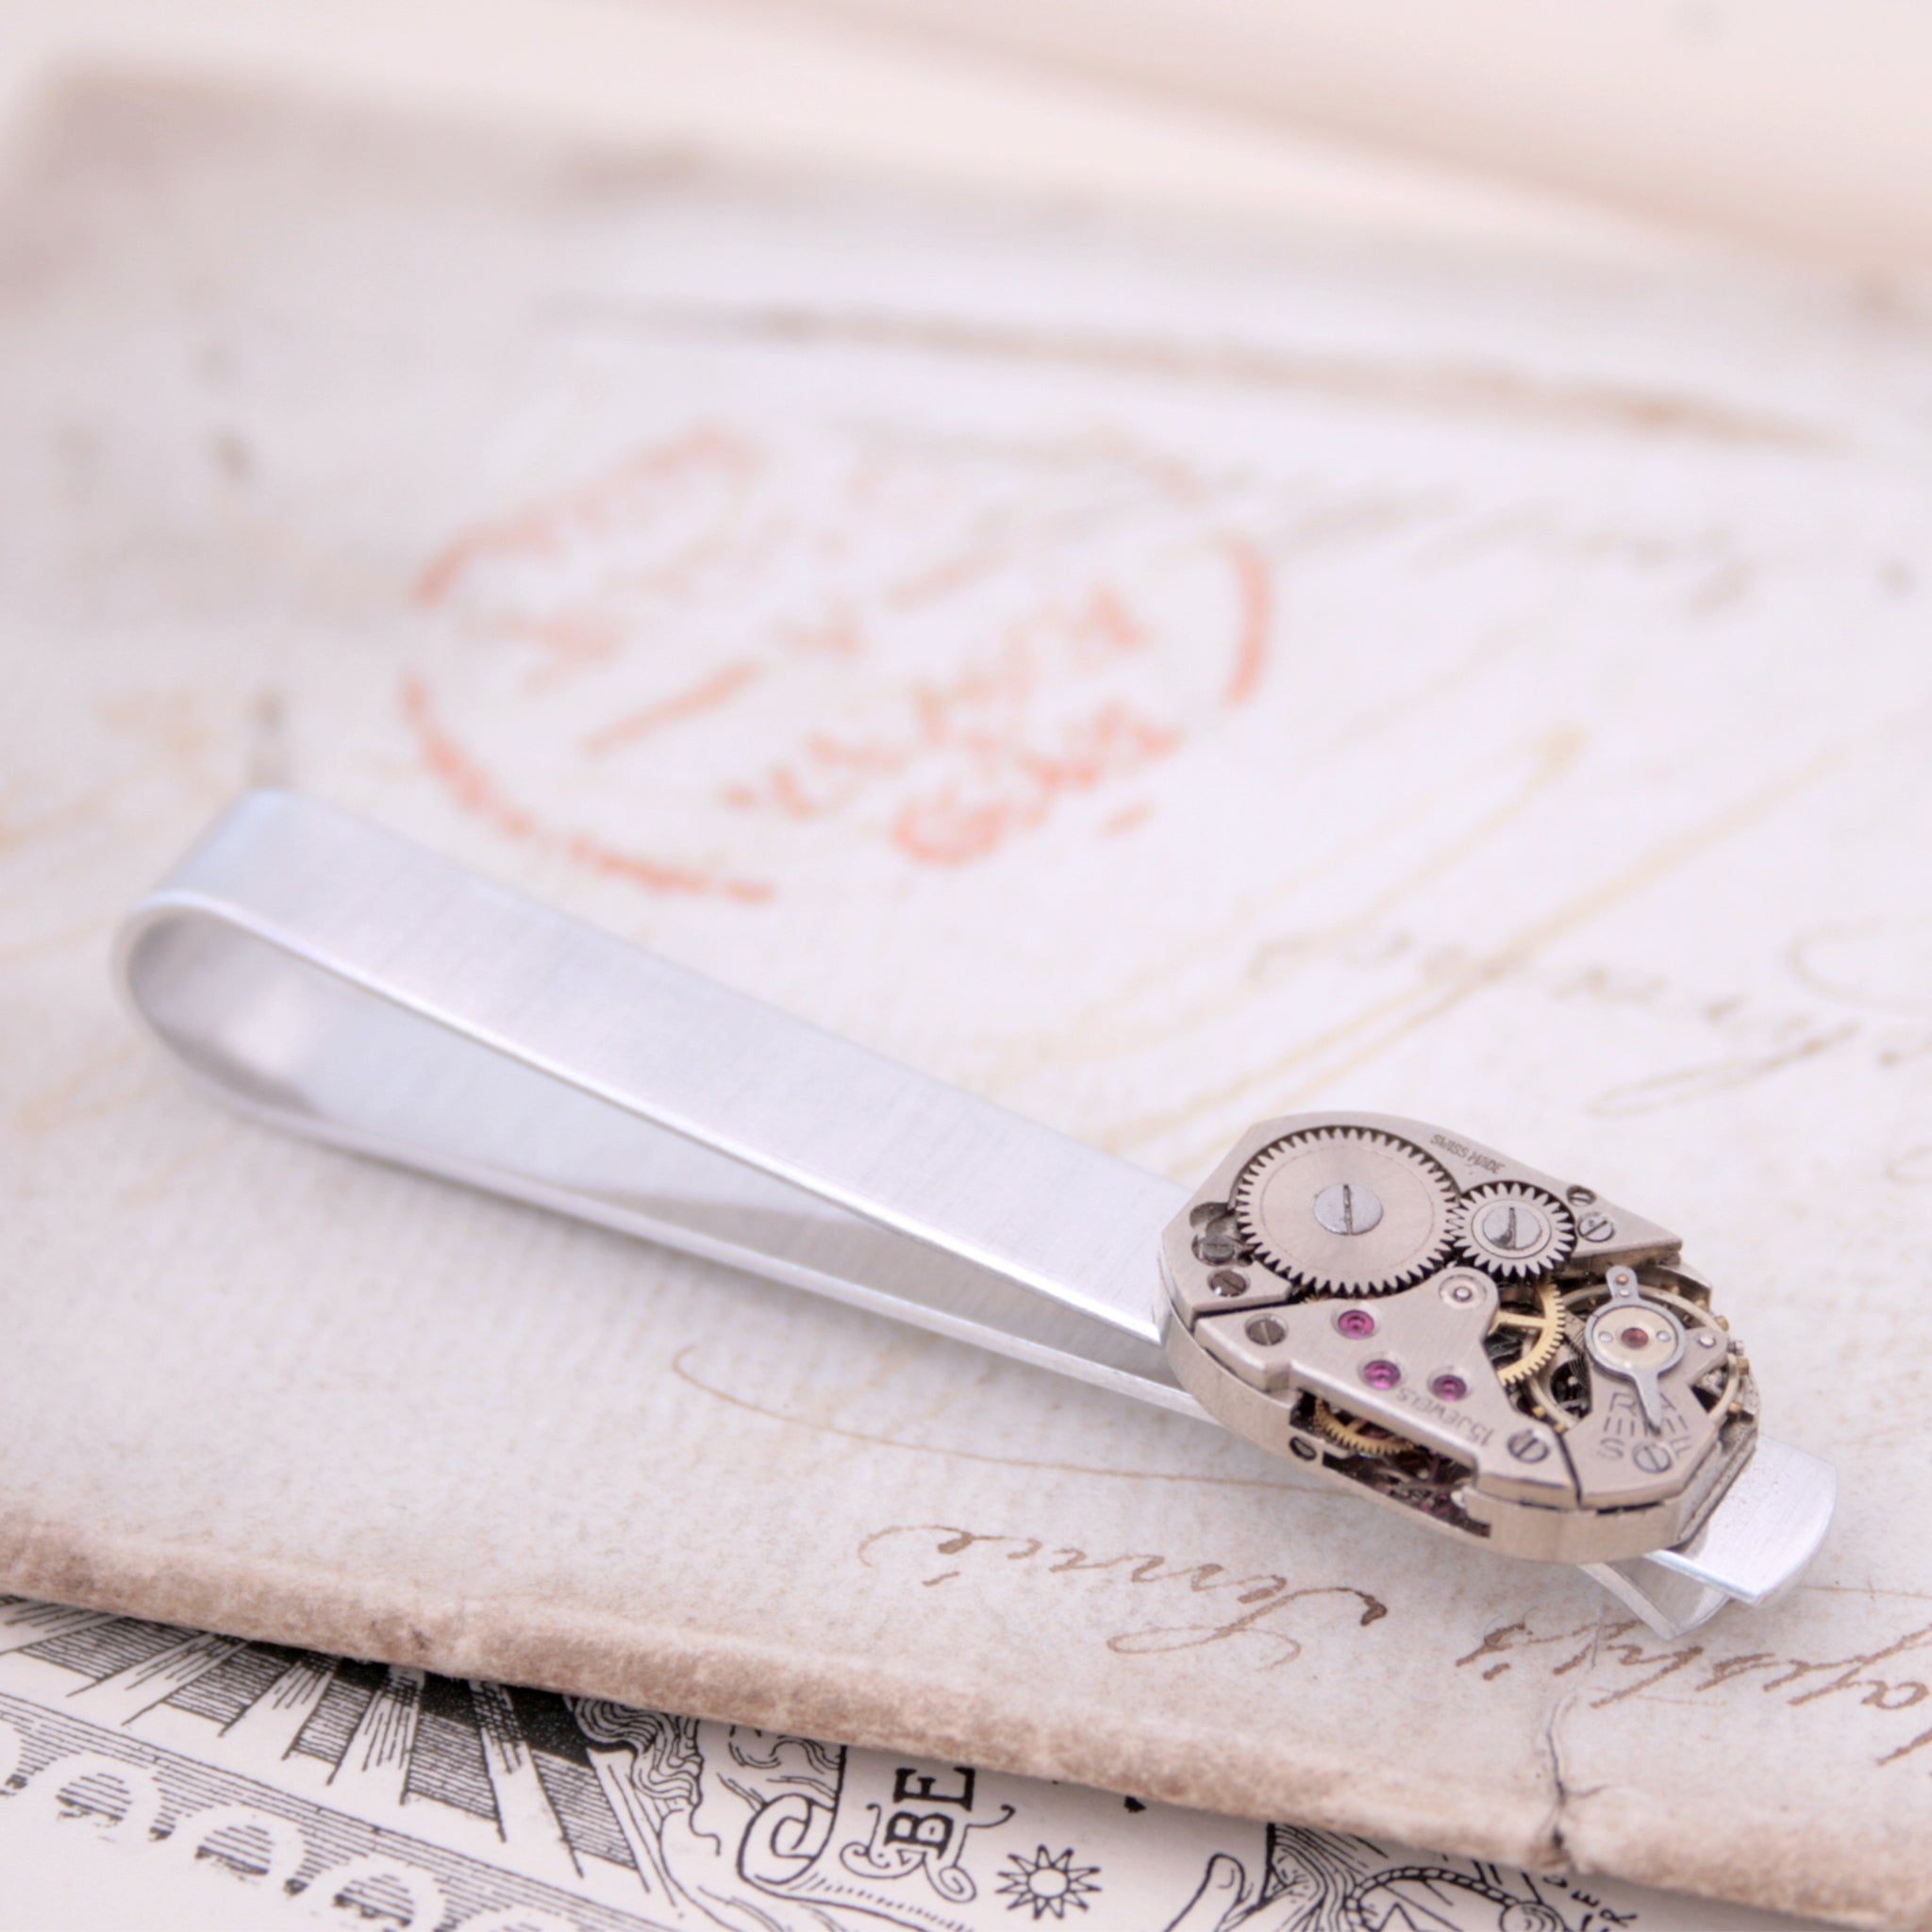 Tie Bar with antique watch movement